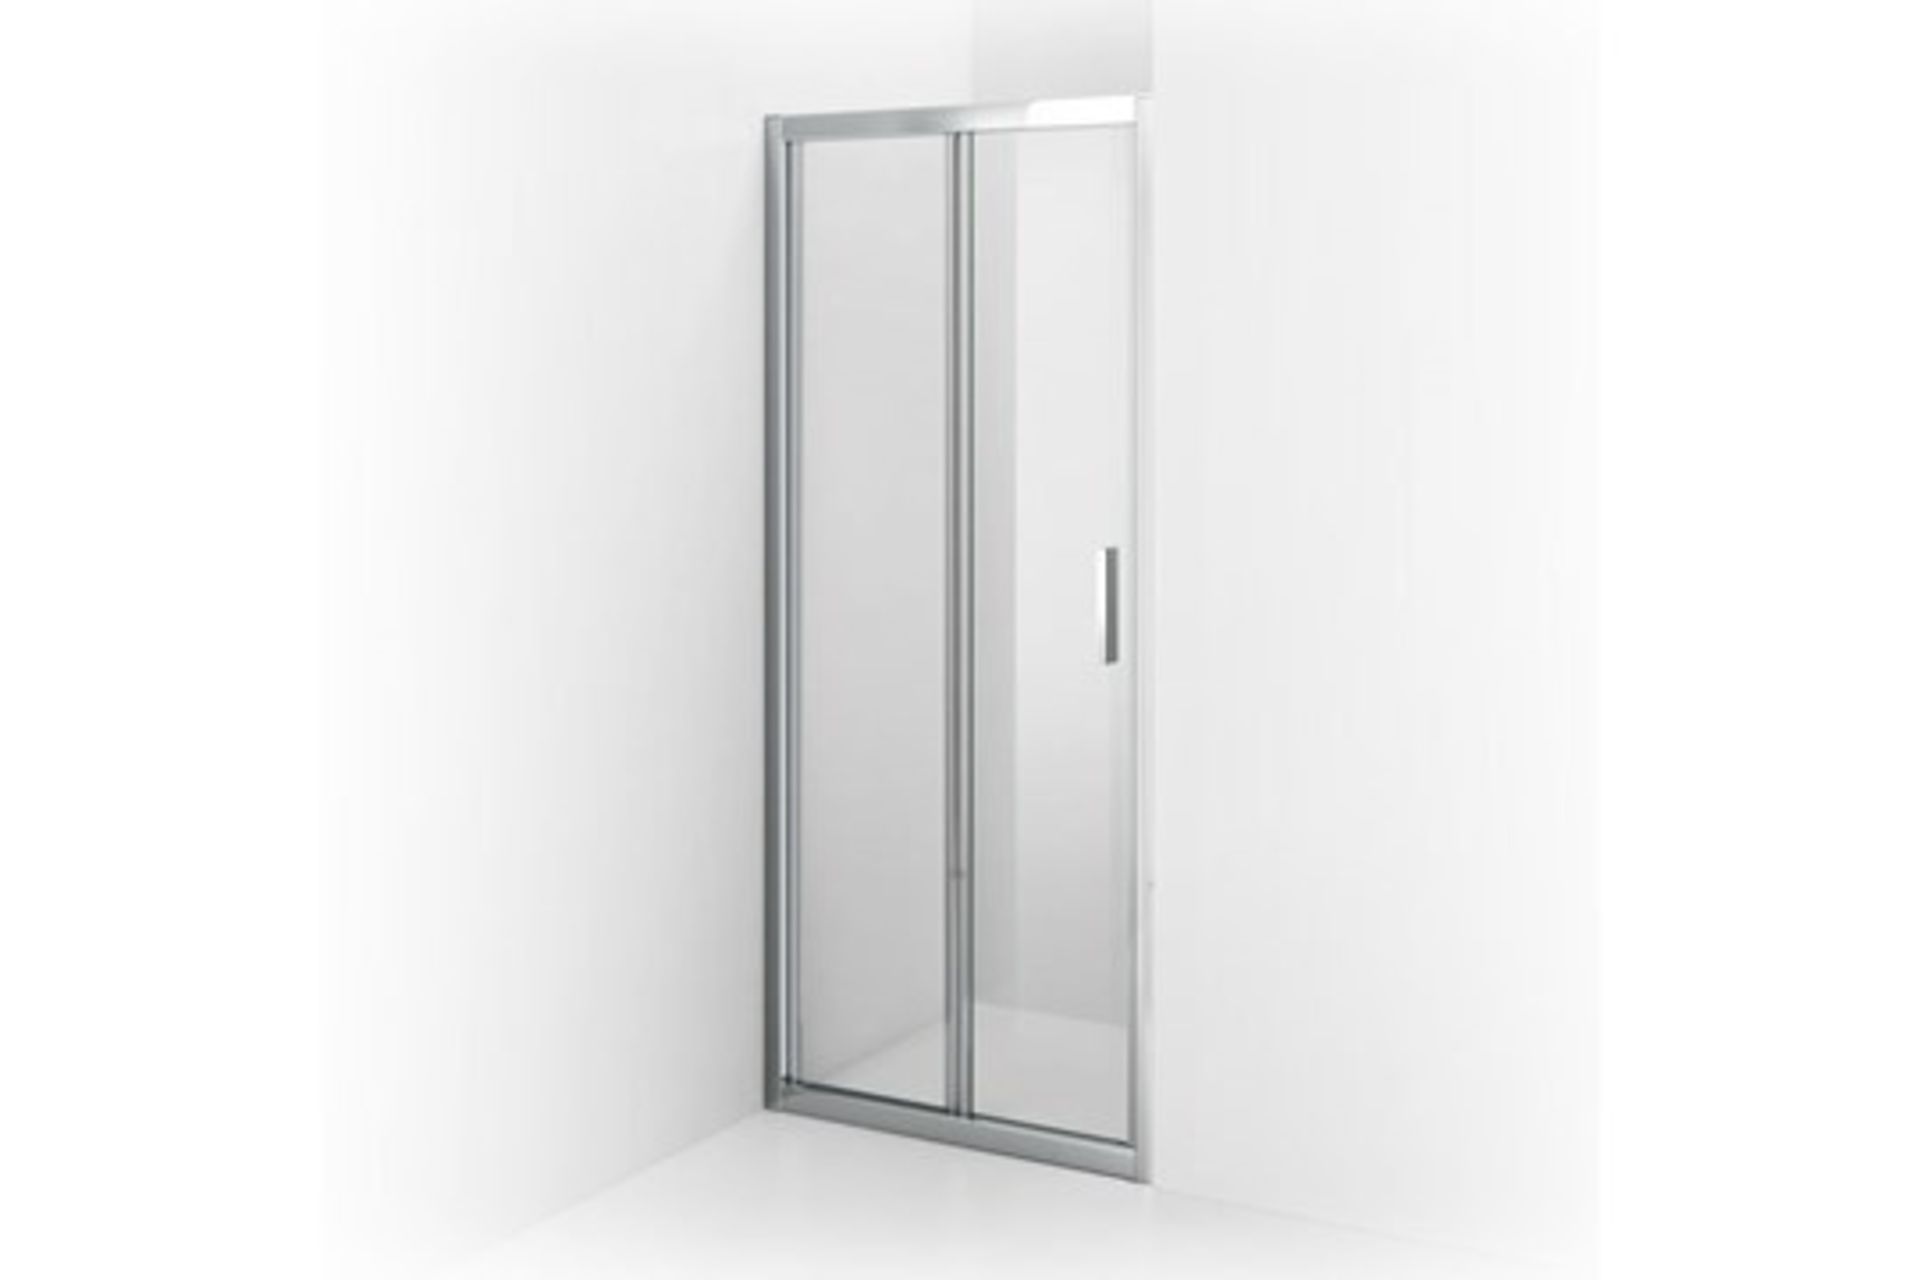 (NY104) 760mm - 6mm - Elements EasyClean Bifold Shower Door. RRP £299.99. 6mm Safety Glass - - Image 3 of 3